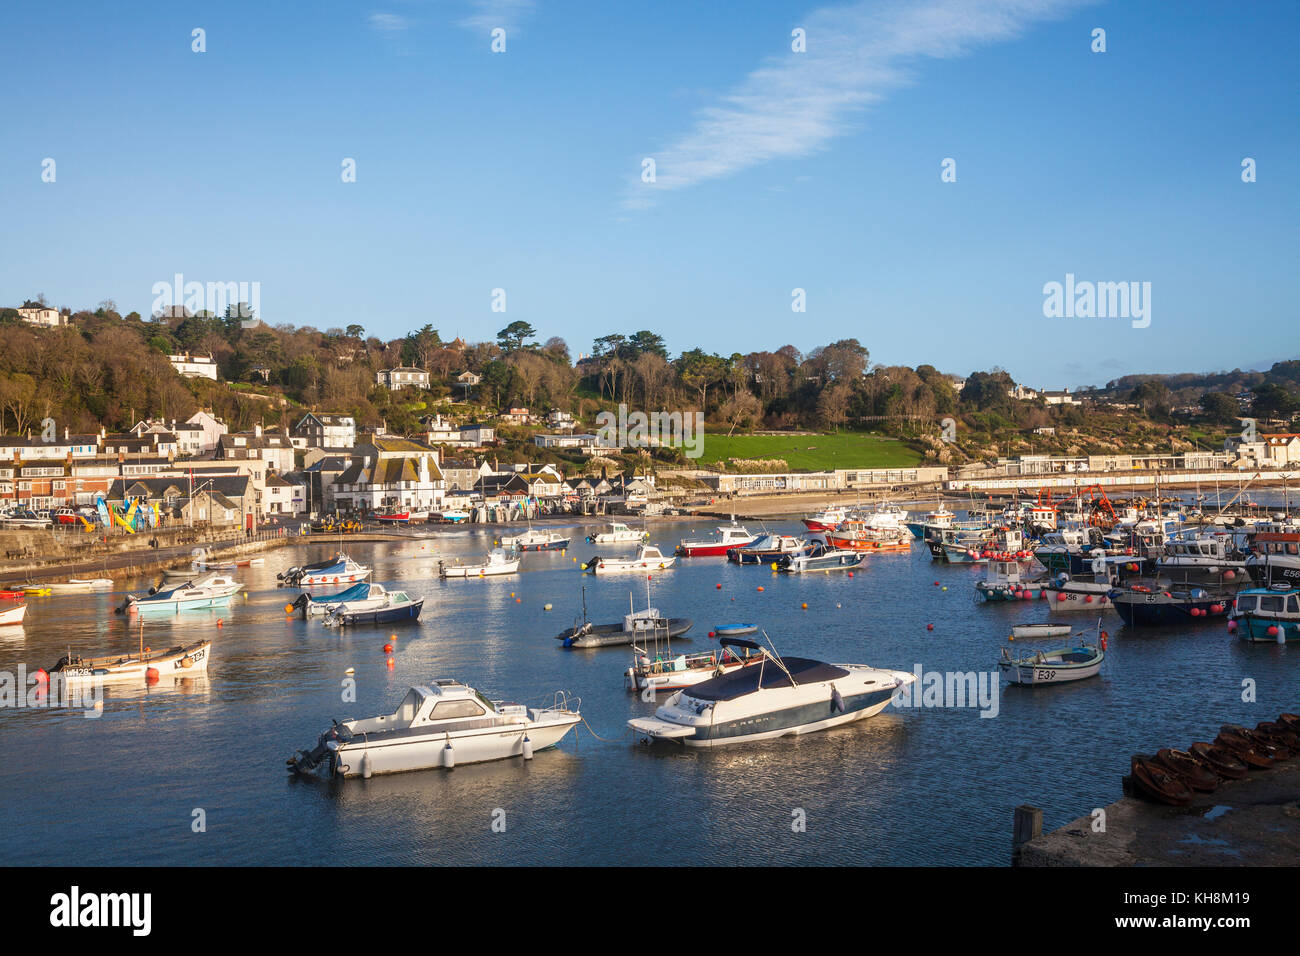 Early morning on the harbour at Lyme Regis in Dorset, UK. Stock Photo